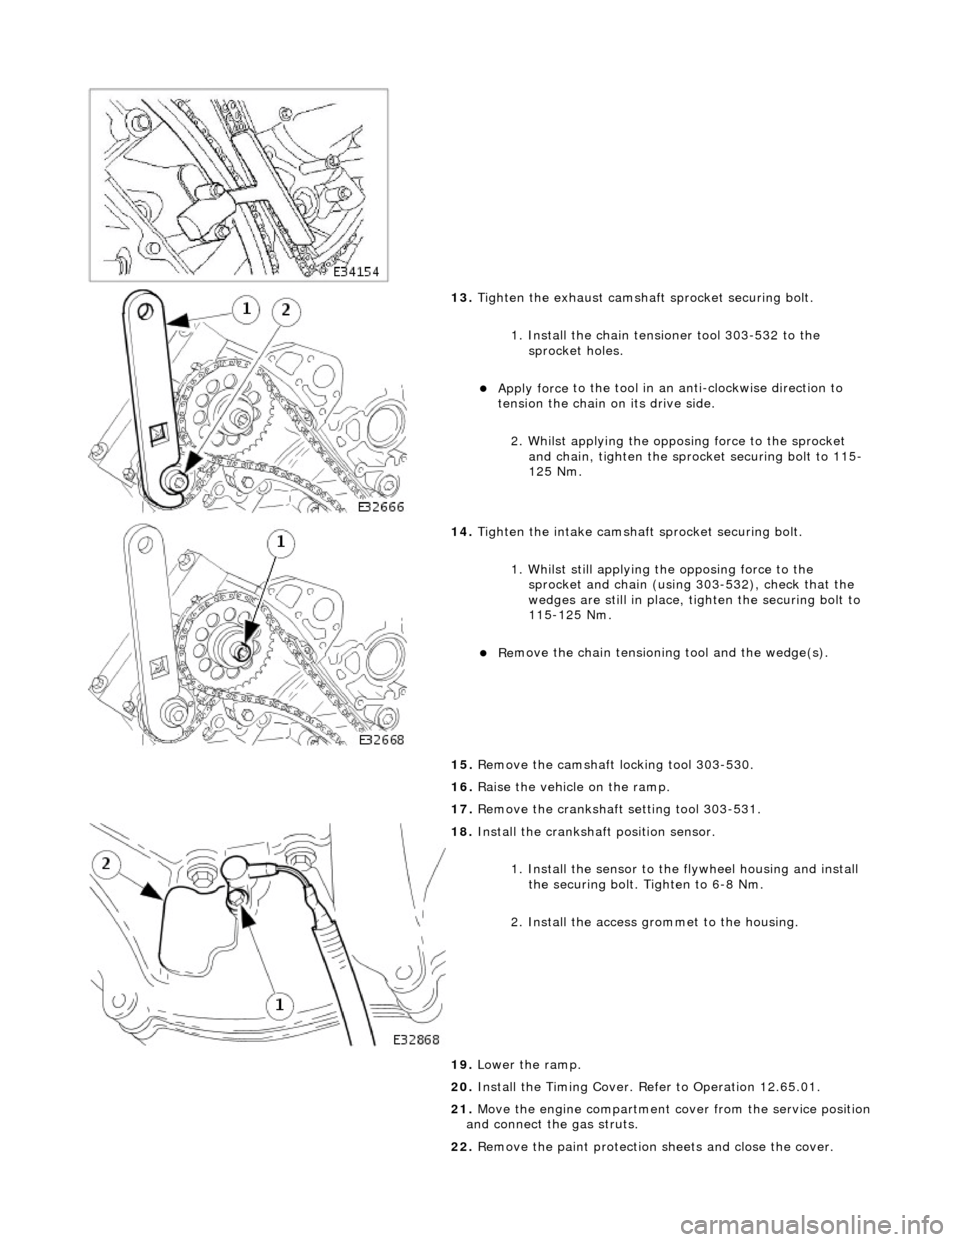 JAGUAR X308 1998 2.G Workshop Manual  
 
13. Tigh
 ten the exhaust camshaft
 sprocket securing bolt. 
1. Install the chain tensioner tool 303-532 to the  sprocket holes. 
Appl y force 
 to the tool in an
 anti-clockwise direction to 
